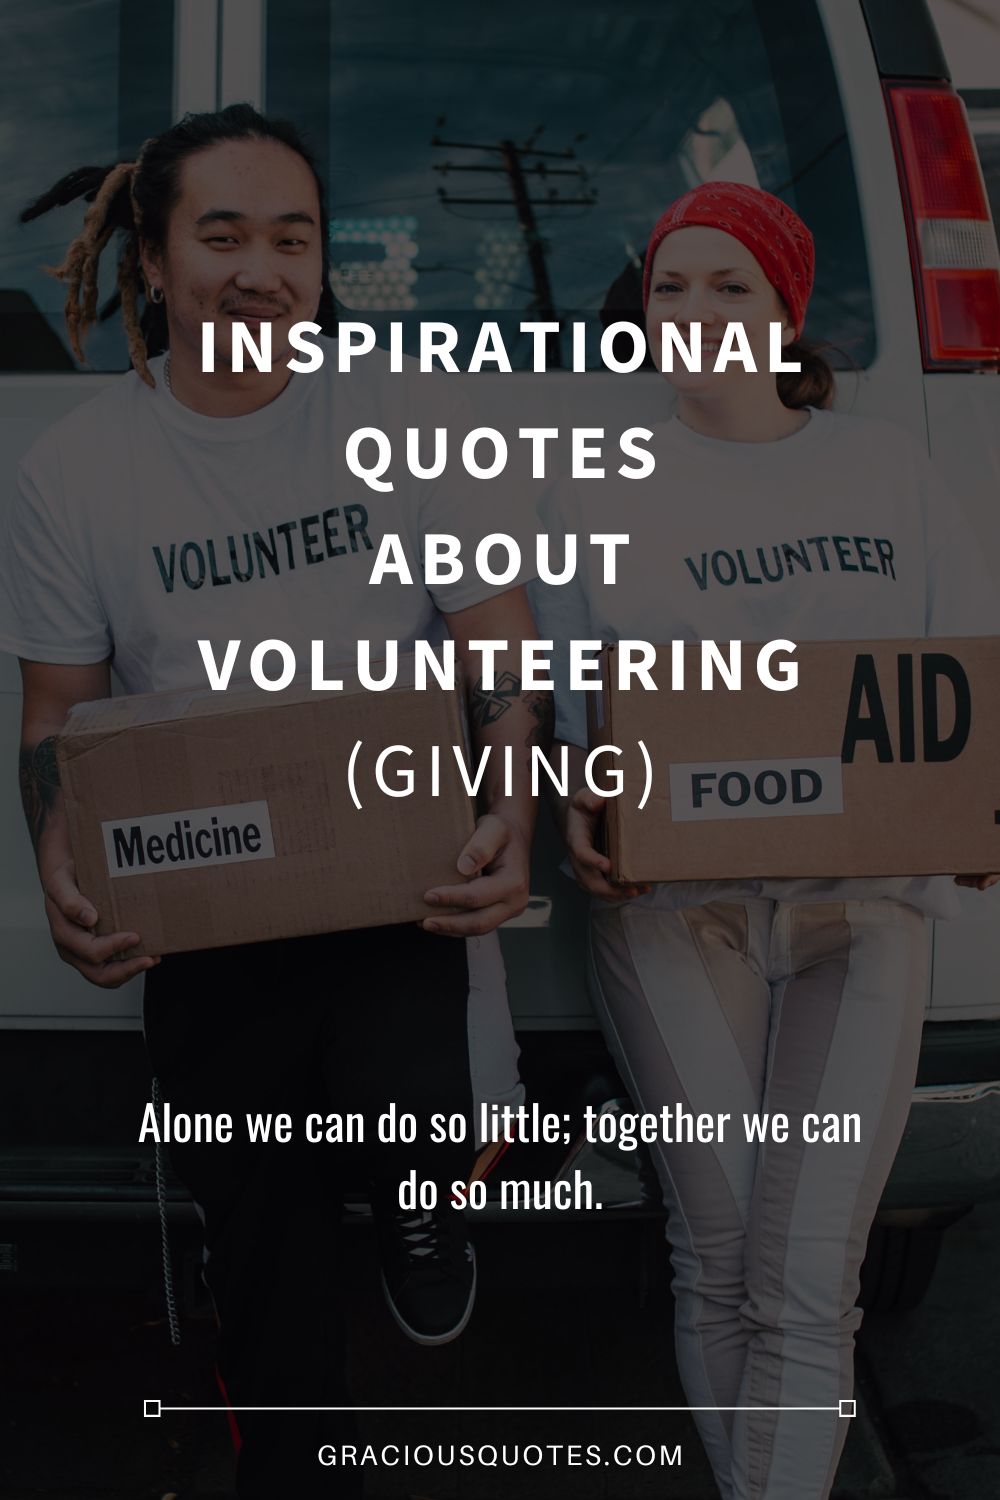 Inspirational Quotes About Volunteering (GIVING) - Gracious Quotes